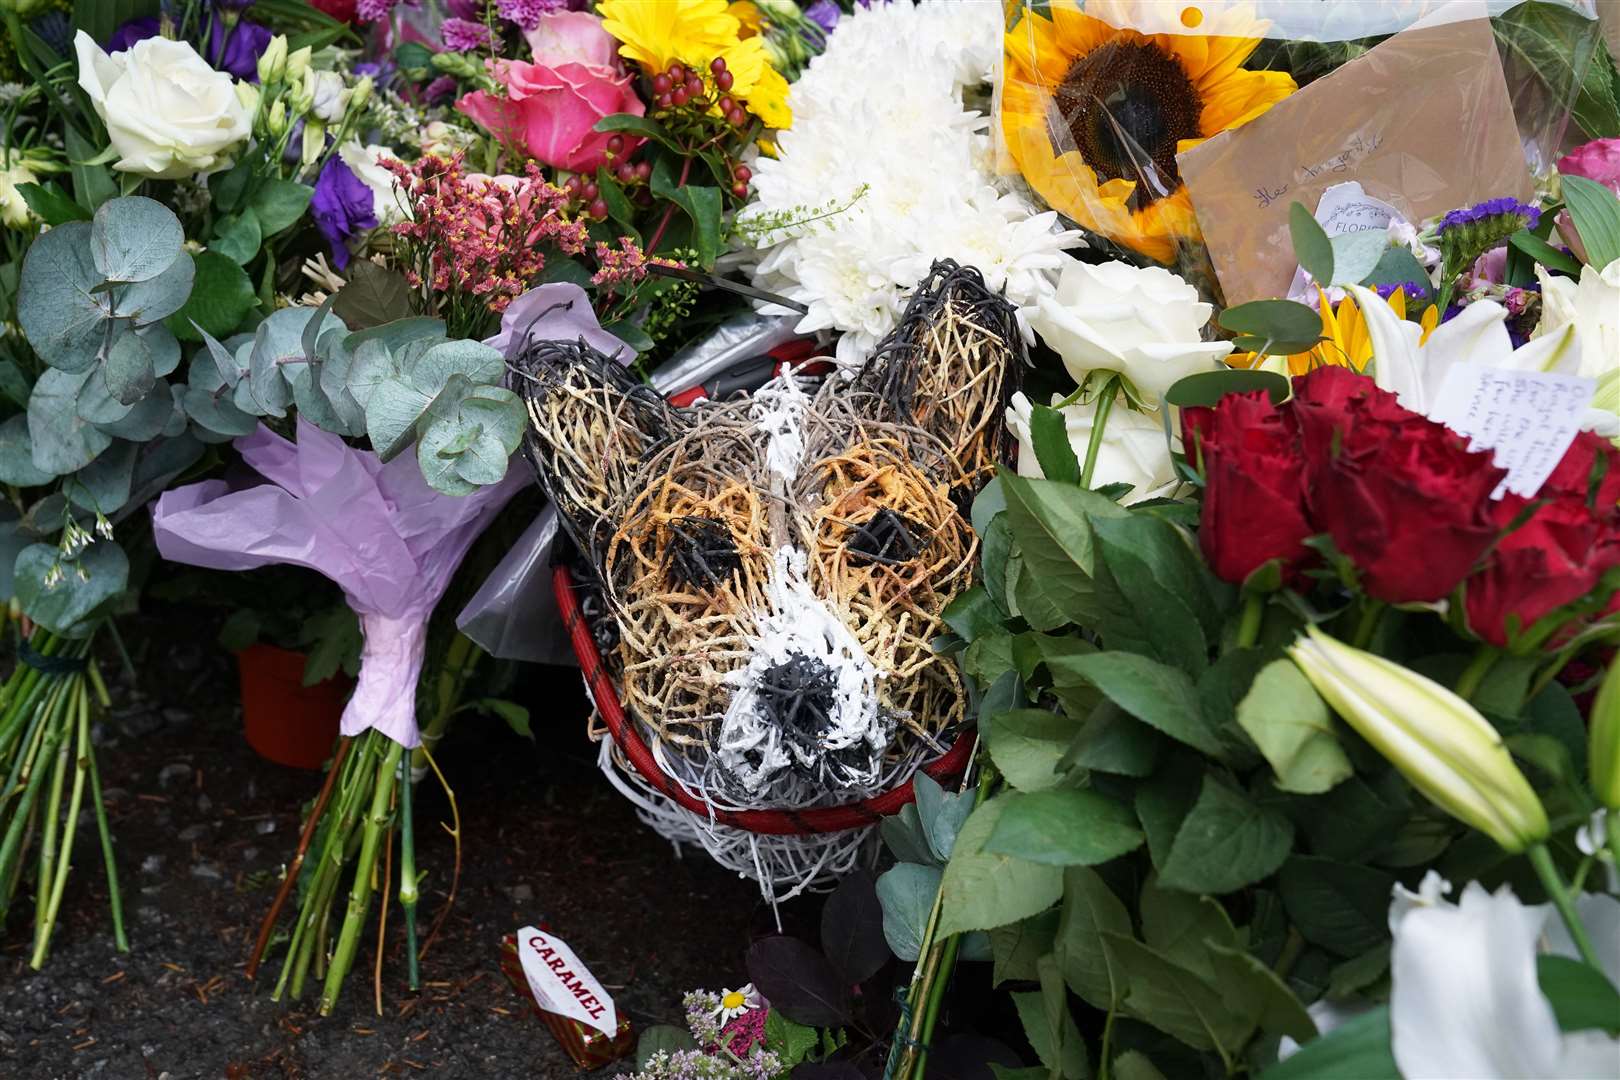 Floral tributes surround a wicker model corgi left at the gates of Balmoral Castle in Aberdeenshire (Owen Humphreys/PA)